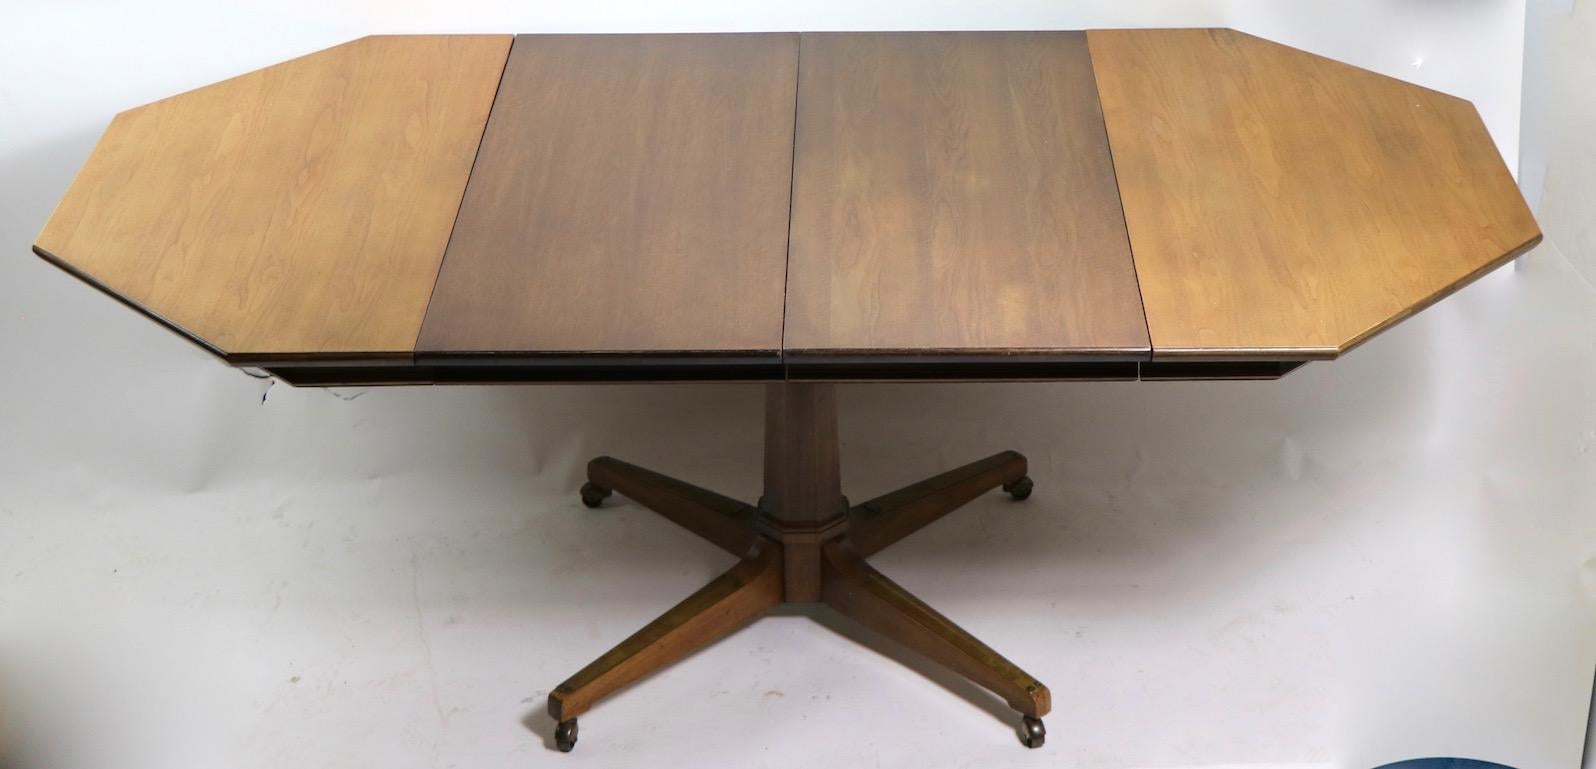 Octagonal Pedestal Dining Table with 2 Leaves Attributed to Kipp Stewart 2